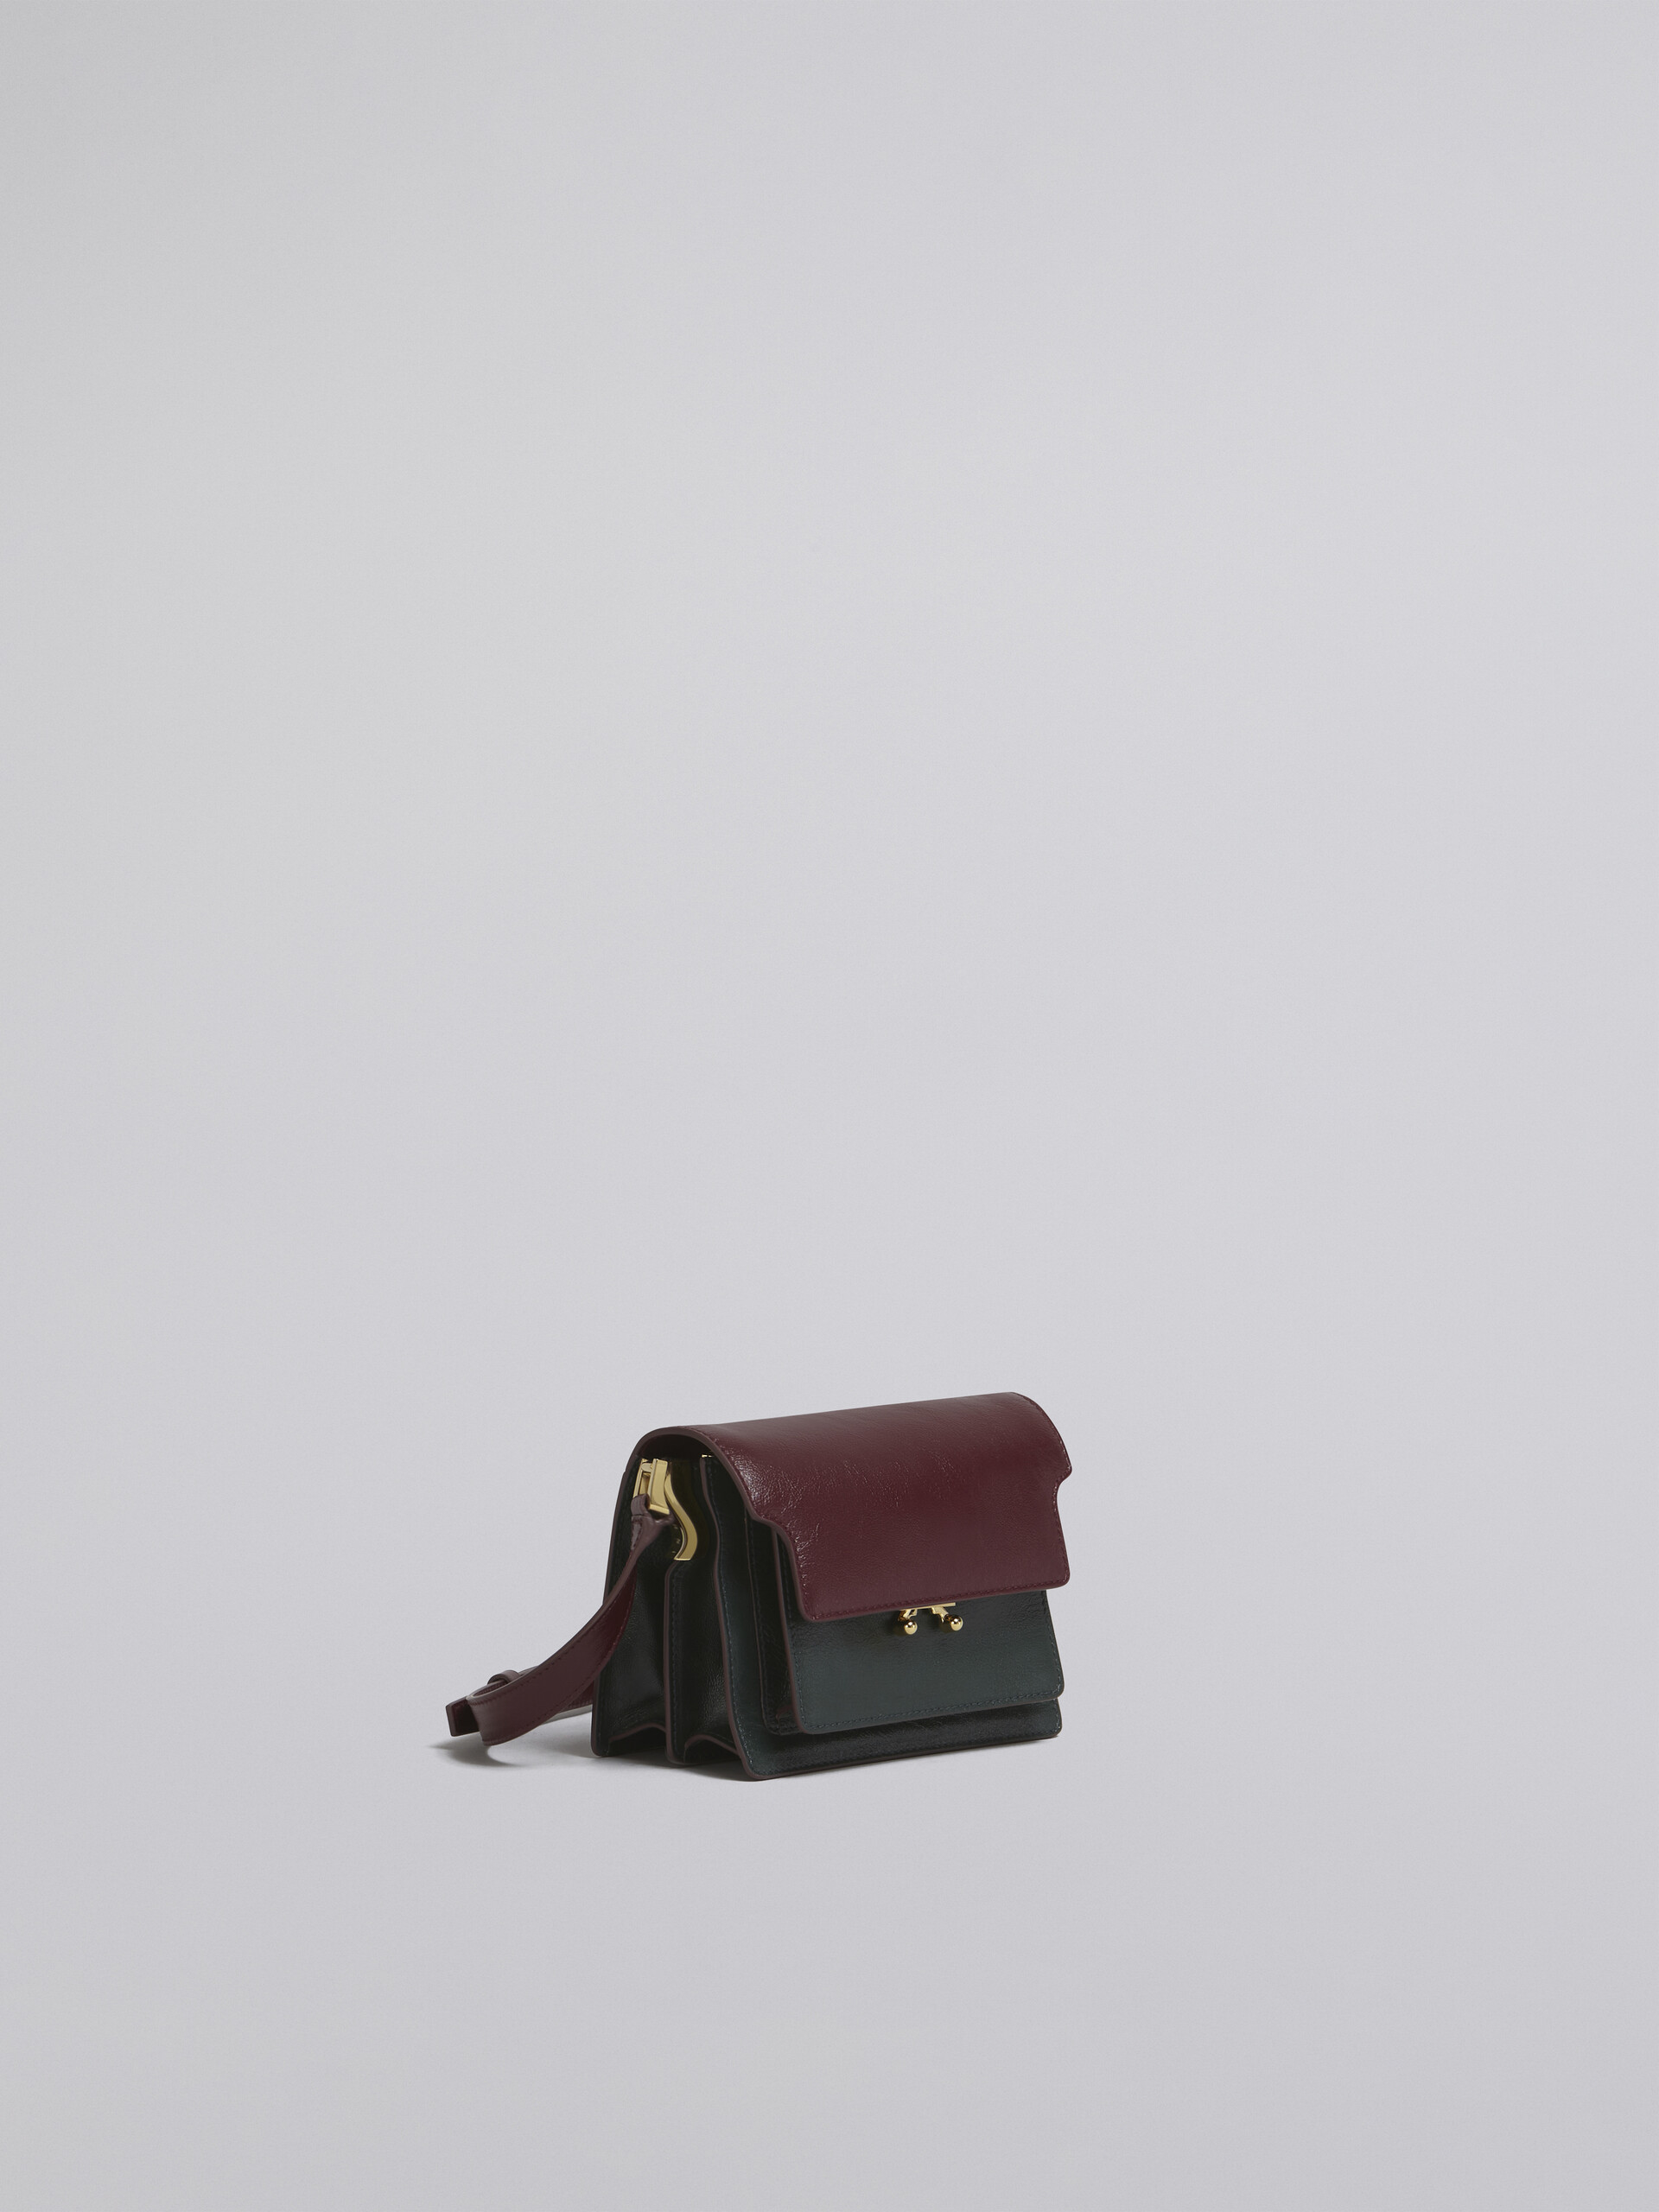 TRUNK SOFT bag in green and burgundy tumbled calf - Shoulder Bags - Image 4